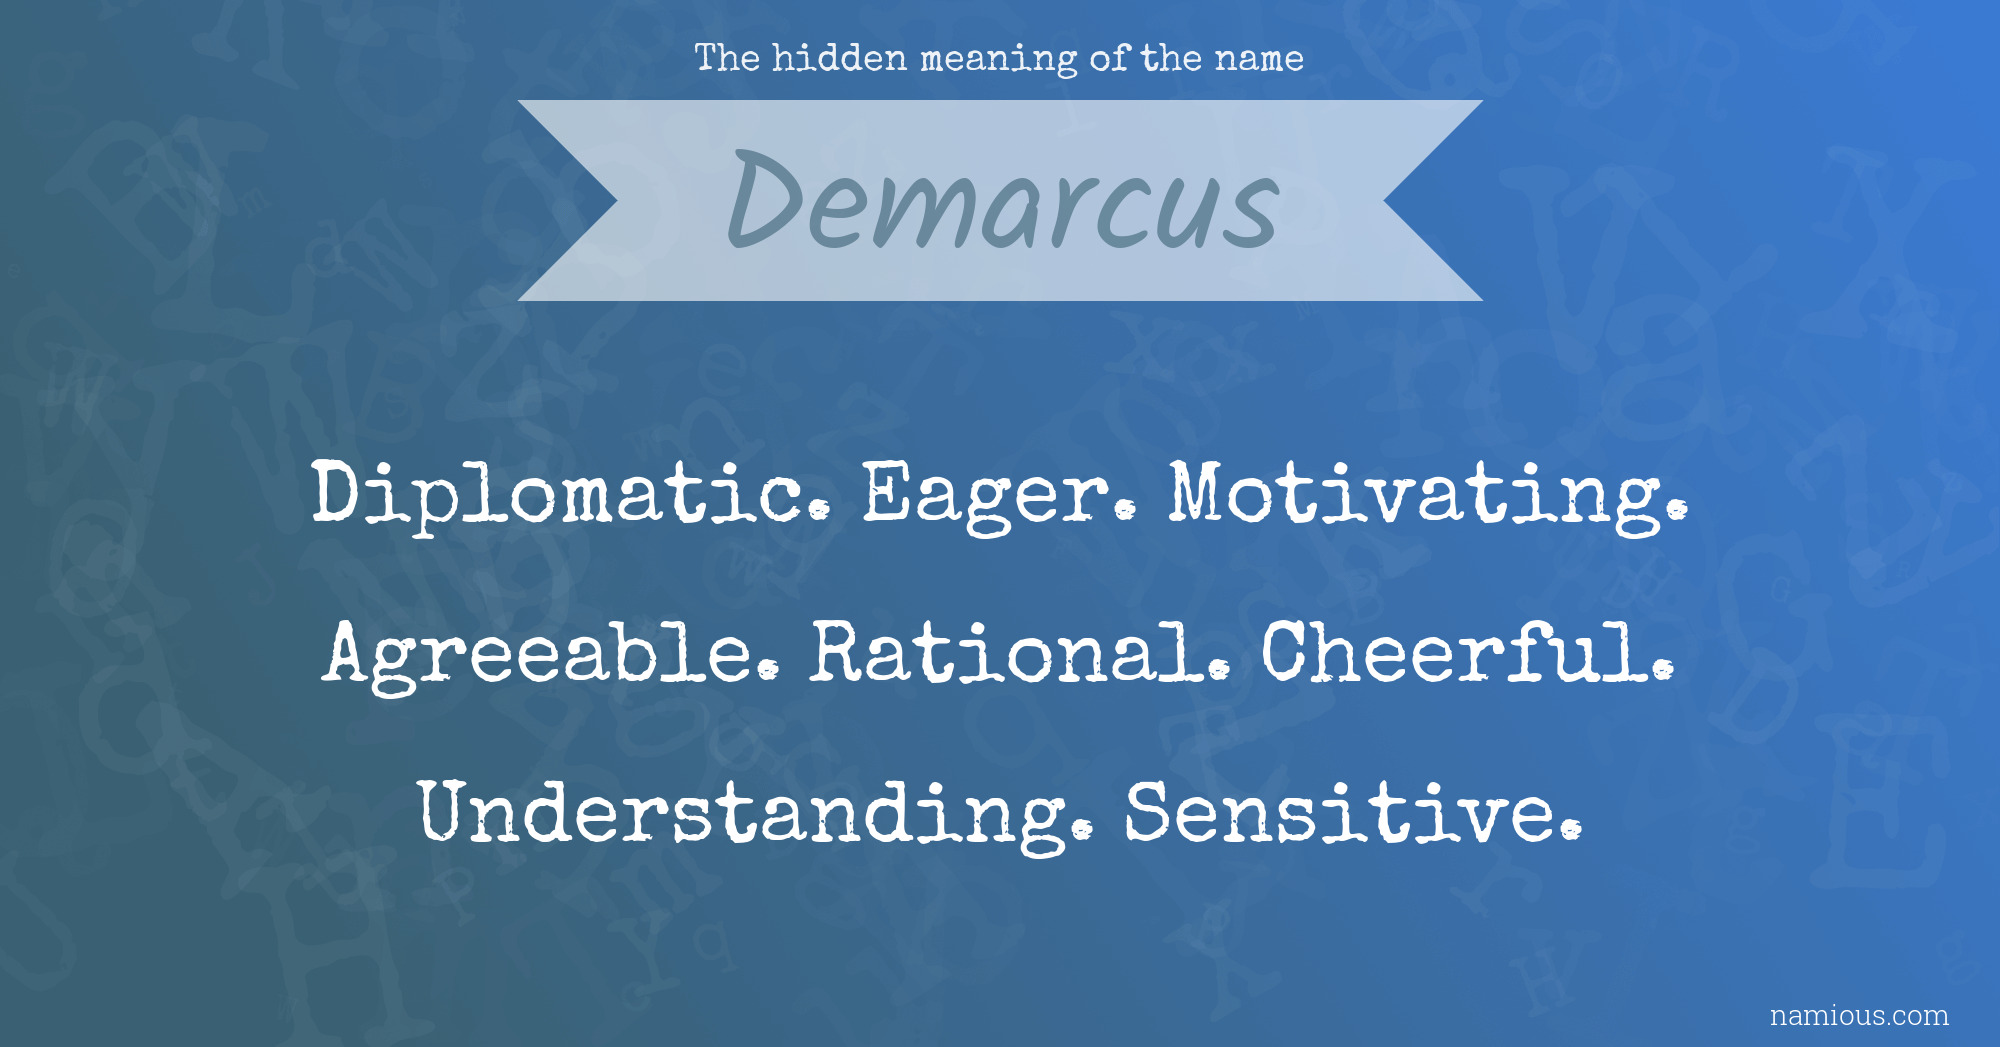 The hidden meaning of the name Demarcus